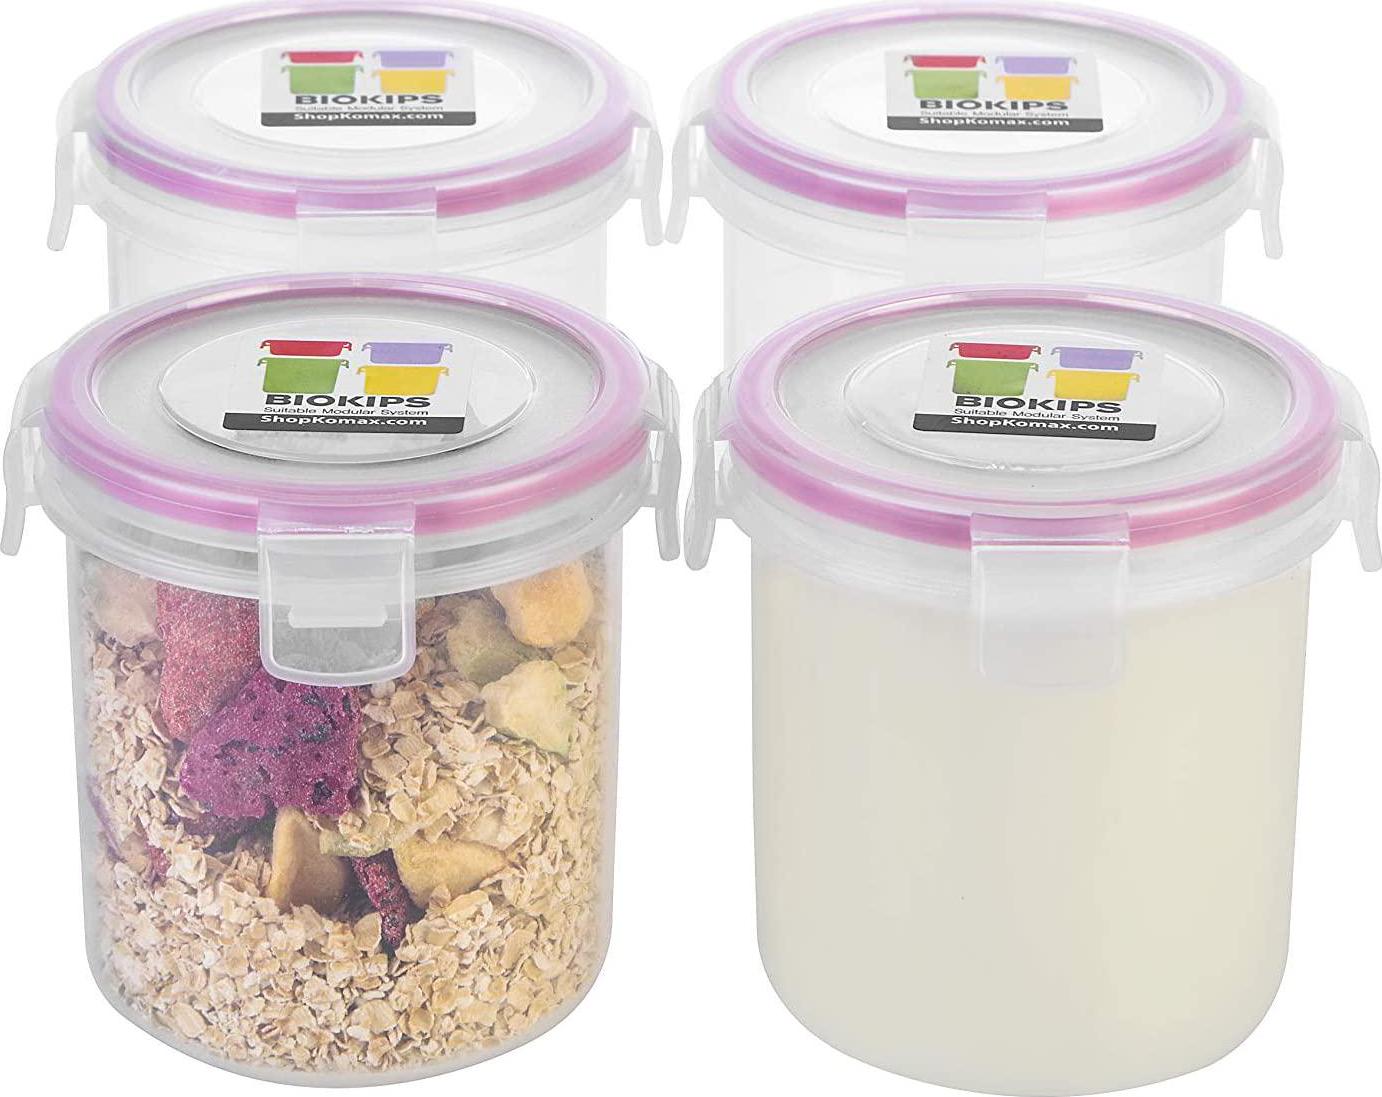 Komax, Komax Biokips Overnight Oats Containers with Lids Set of 4 Round Airtight Food Storage Containers for Oatmeal, Cereal, Milk and More BPA-Free Meal Prep Container Set w/Locking Lids (18.6 oz)